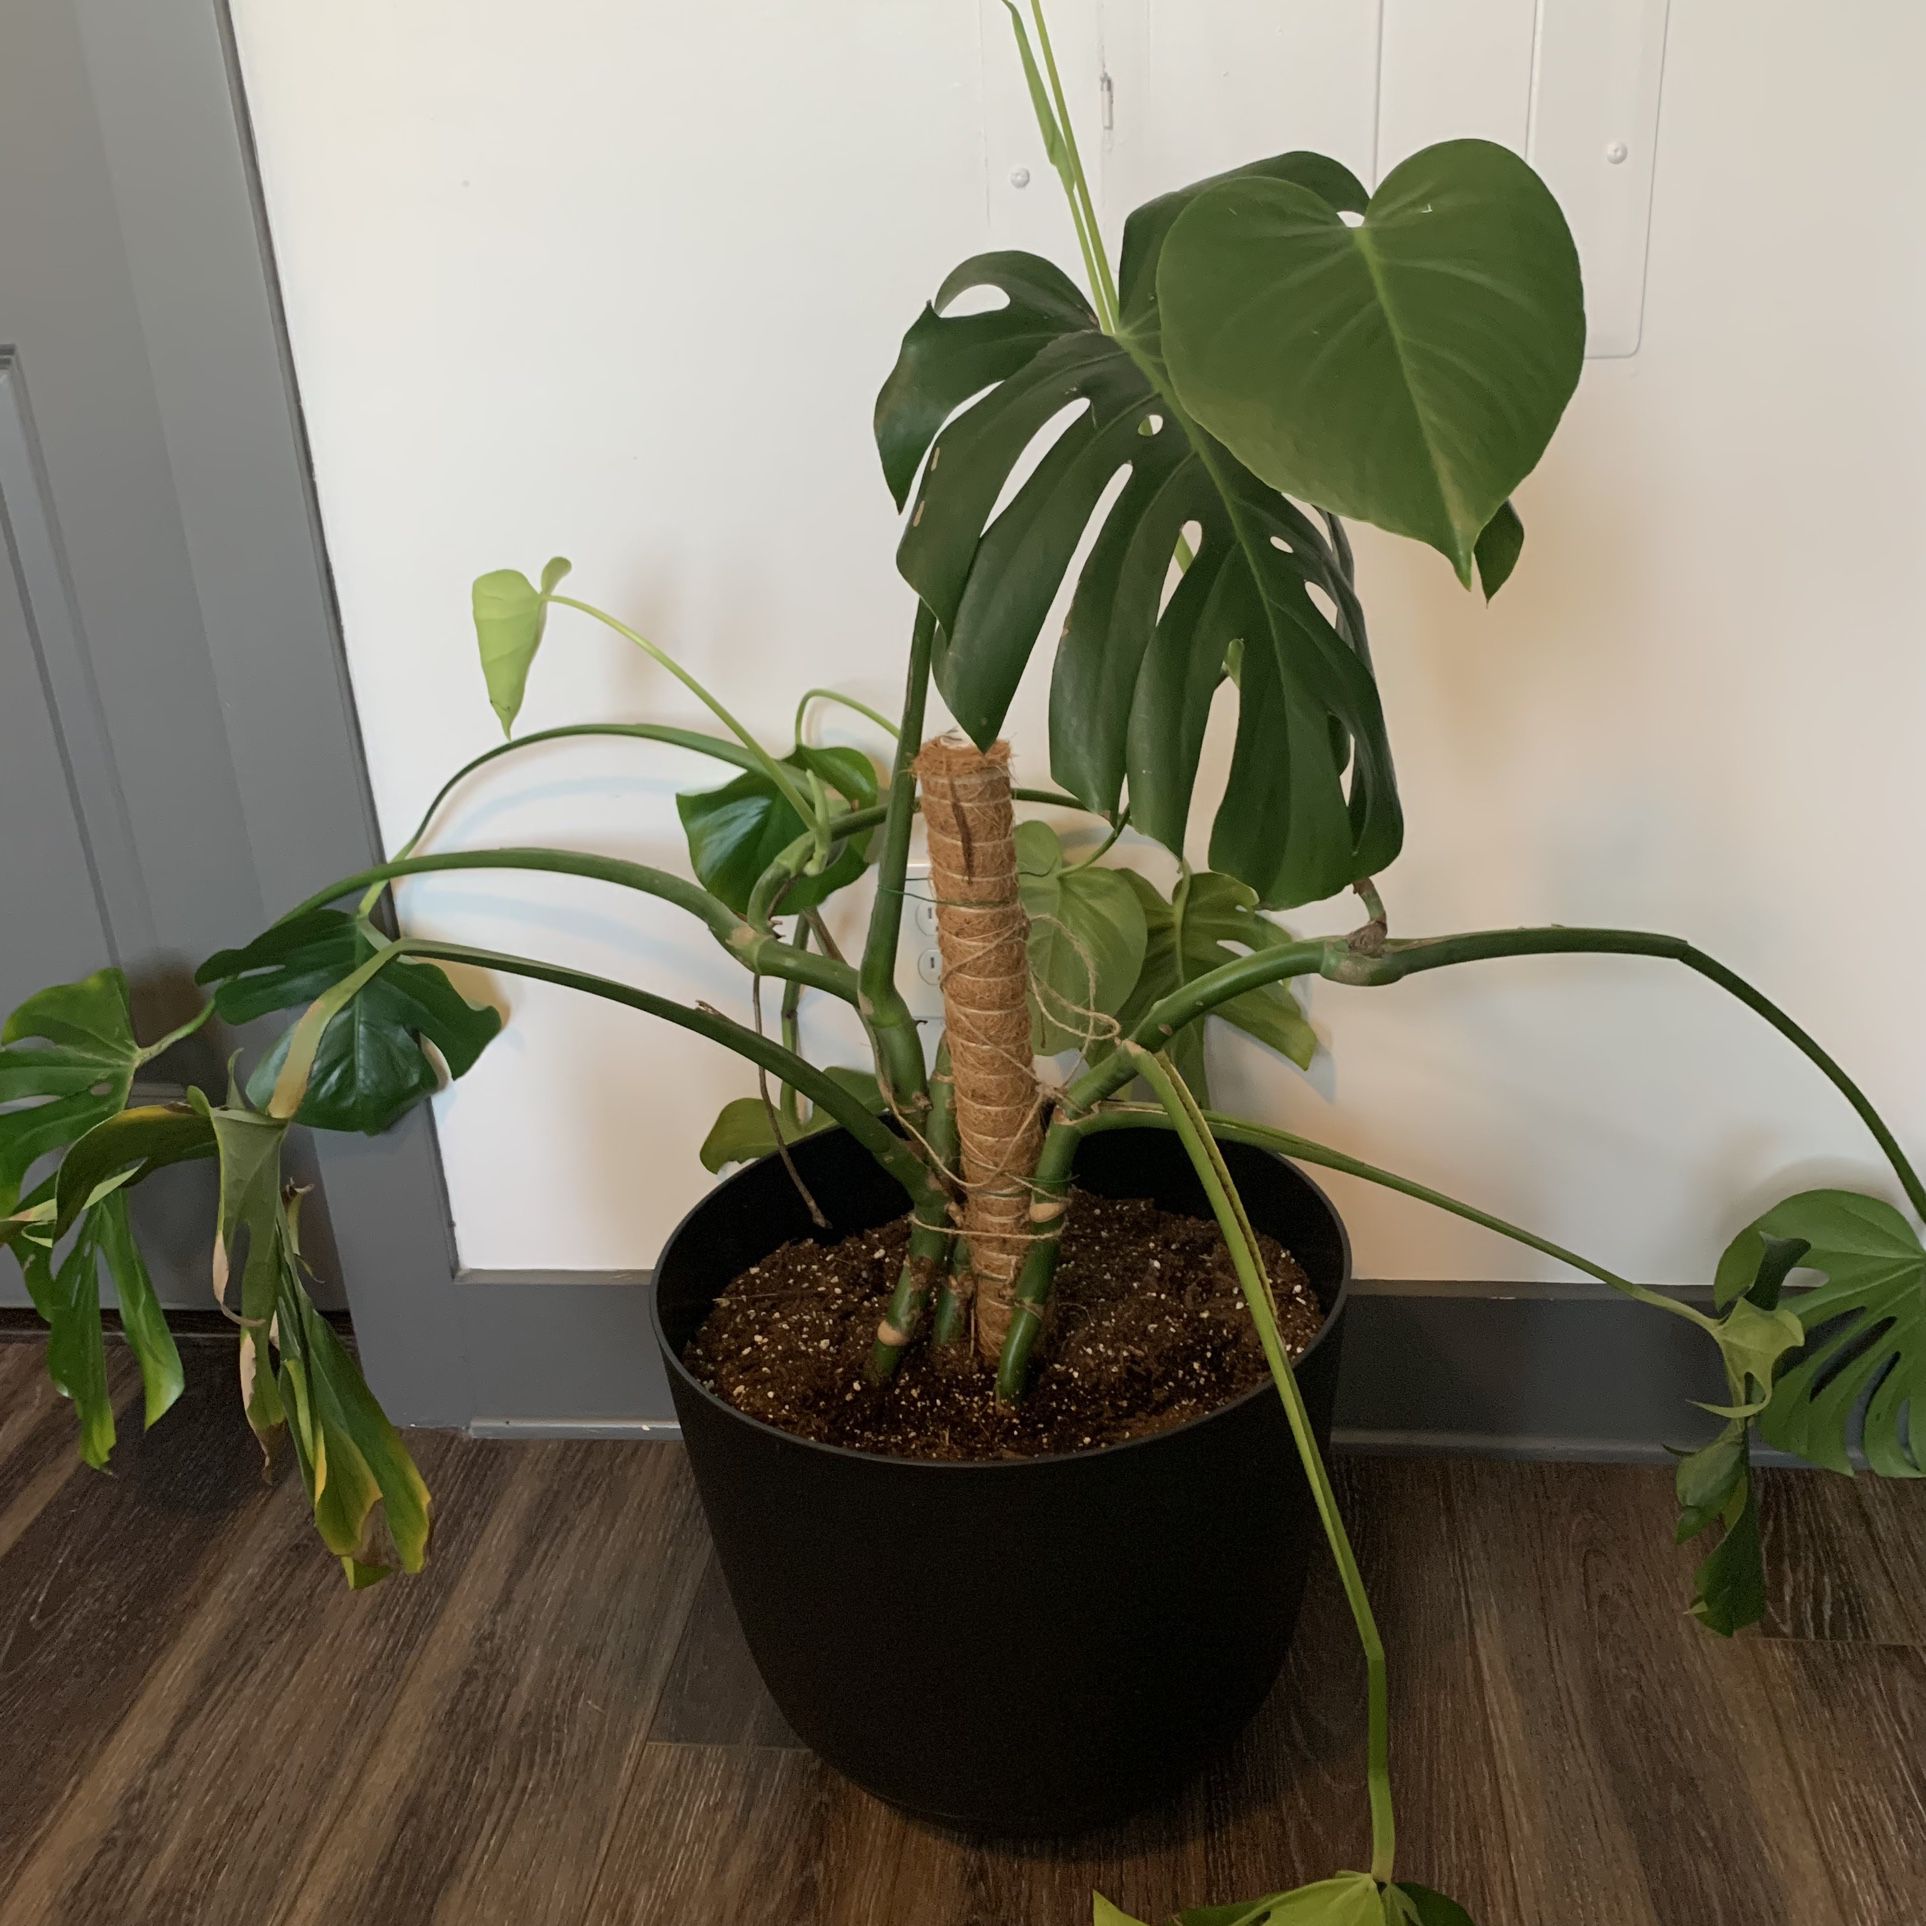 Large healthy monstera plant